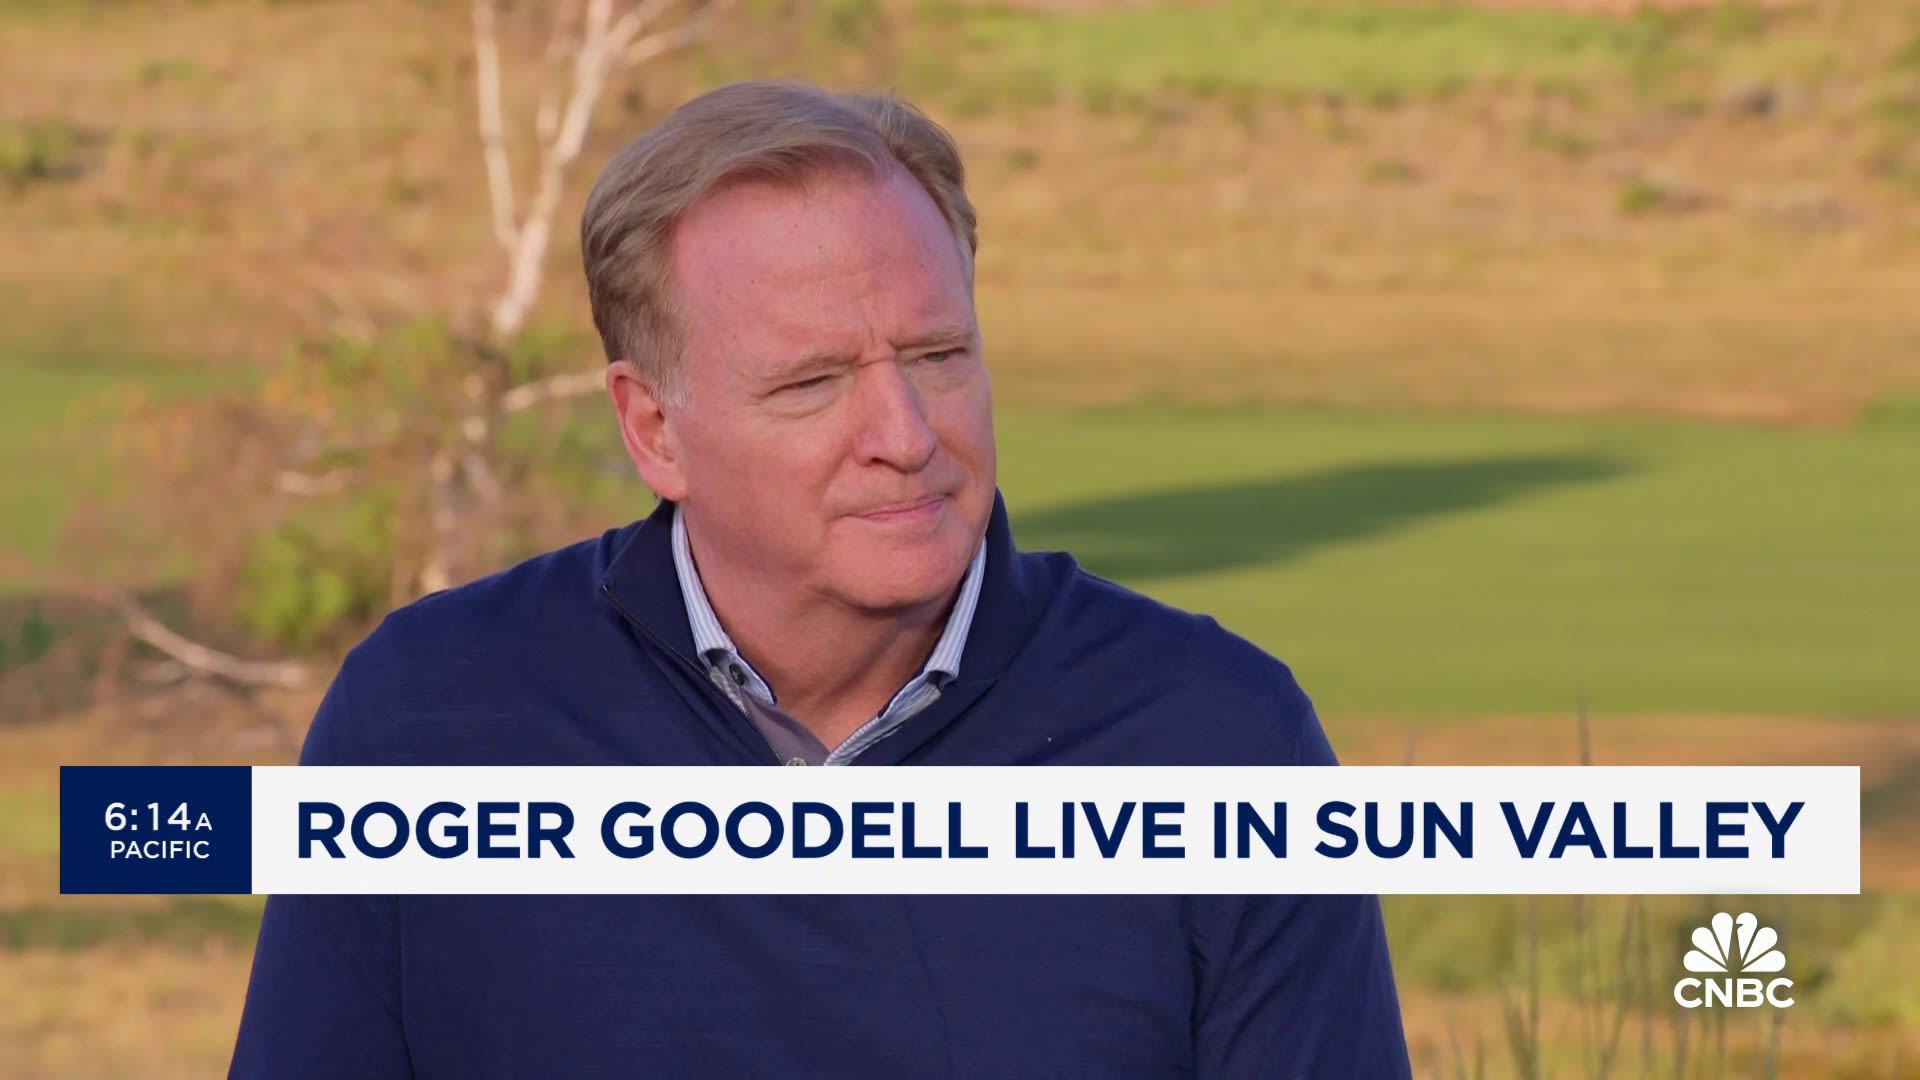 NFL's Roger Goodell on international expansion: Believe the game will be incredibly popular globally